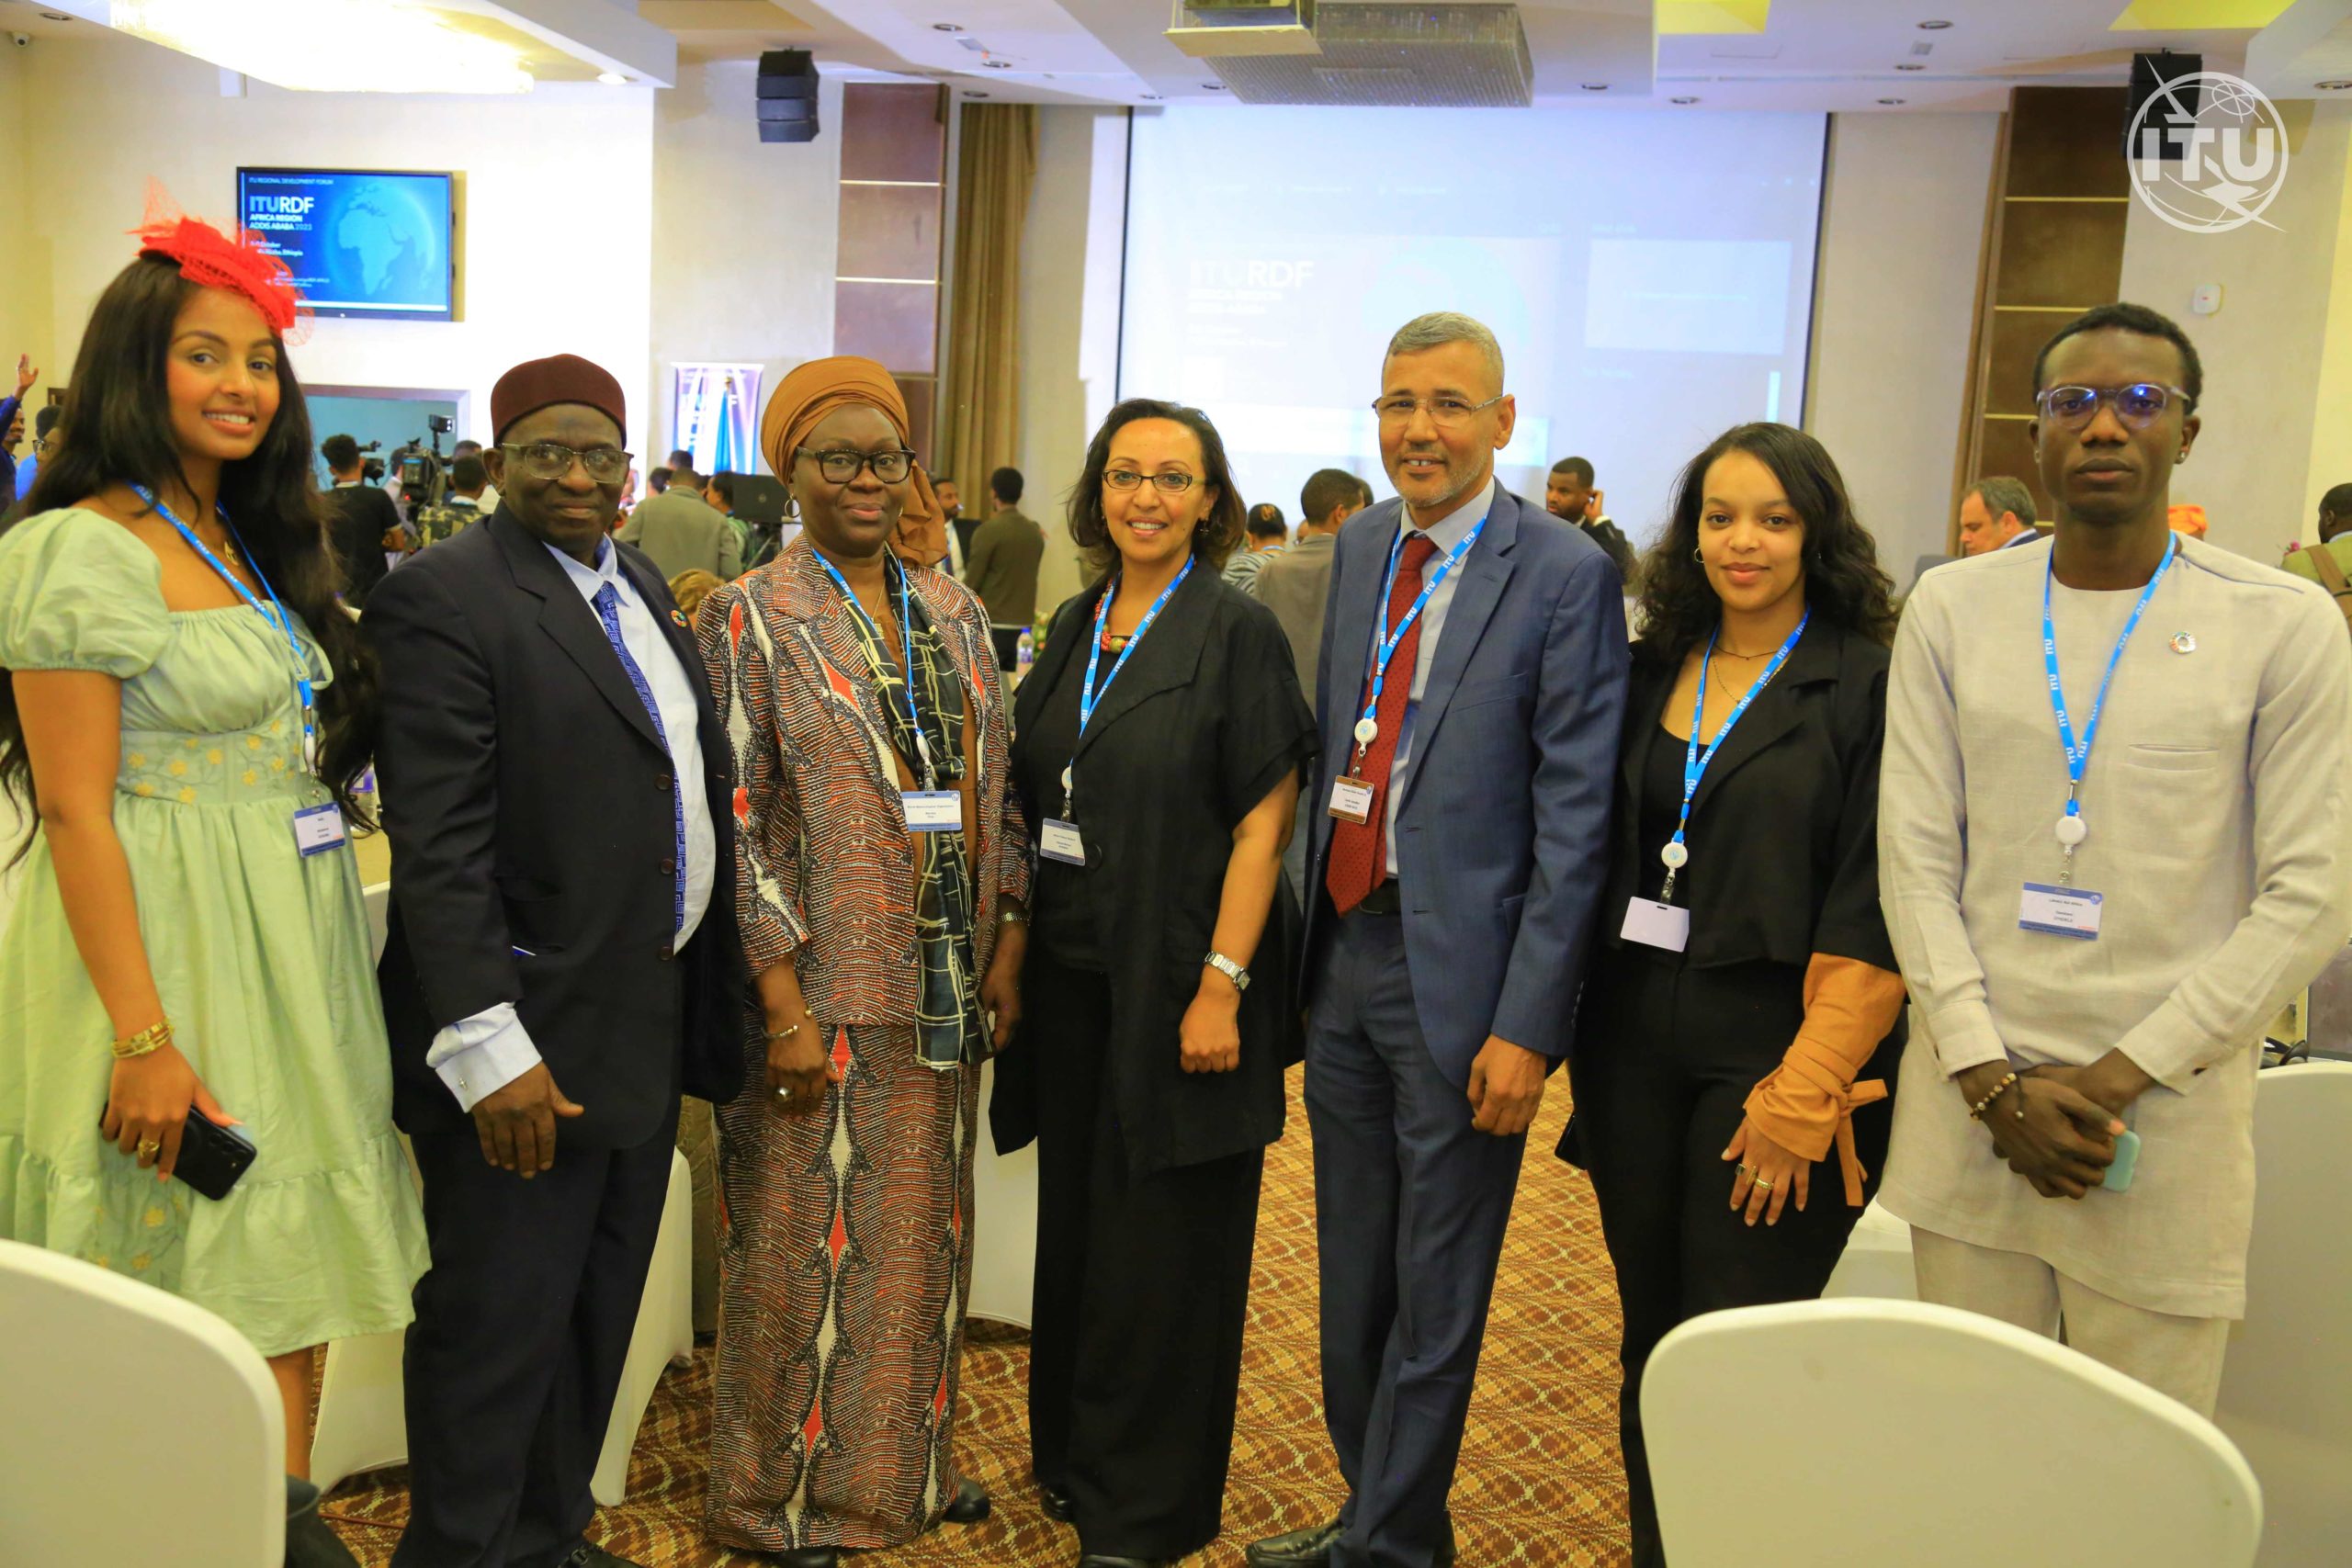 Group of delegates at the International Telecommunications Union Regional Development Forum, Africa. Left to right, a woman in a green dress with a red flower in her hair. A man with a red hat. a woman in a patterned shirt and top, a woman in black, a man in a blue suit with a red tie, a woman in black, and a man in a beige top and trousers. 